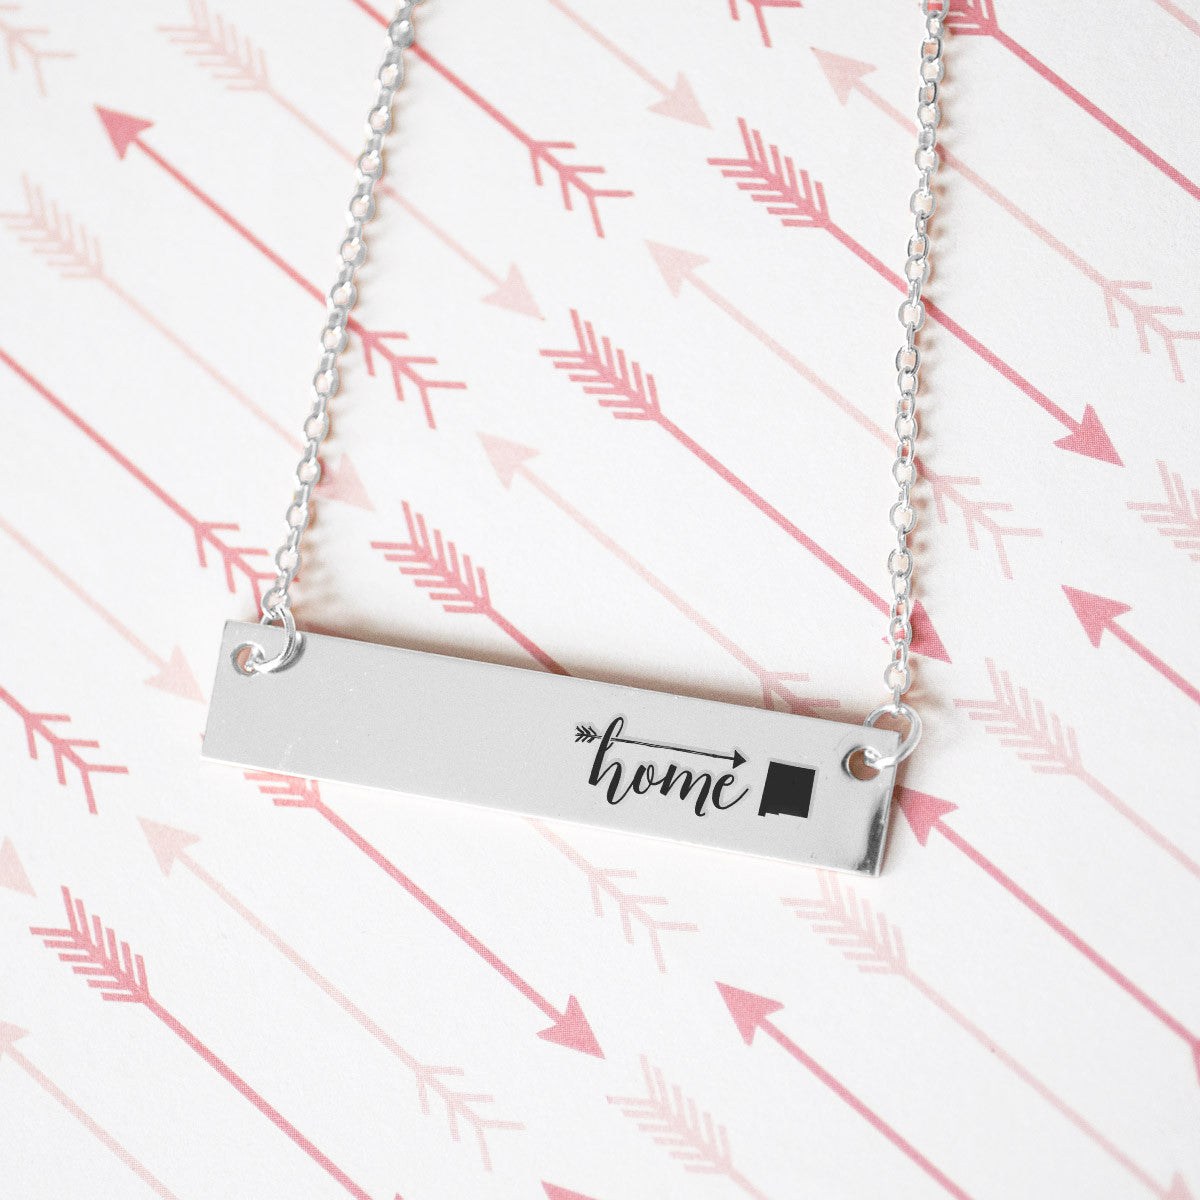 Home is New Mexico Gold / Silver Bar Necklace - pipercleo.com